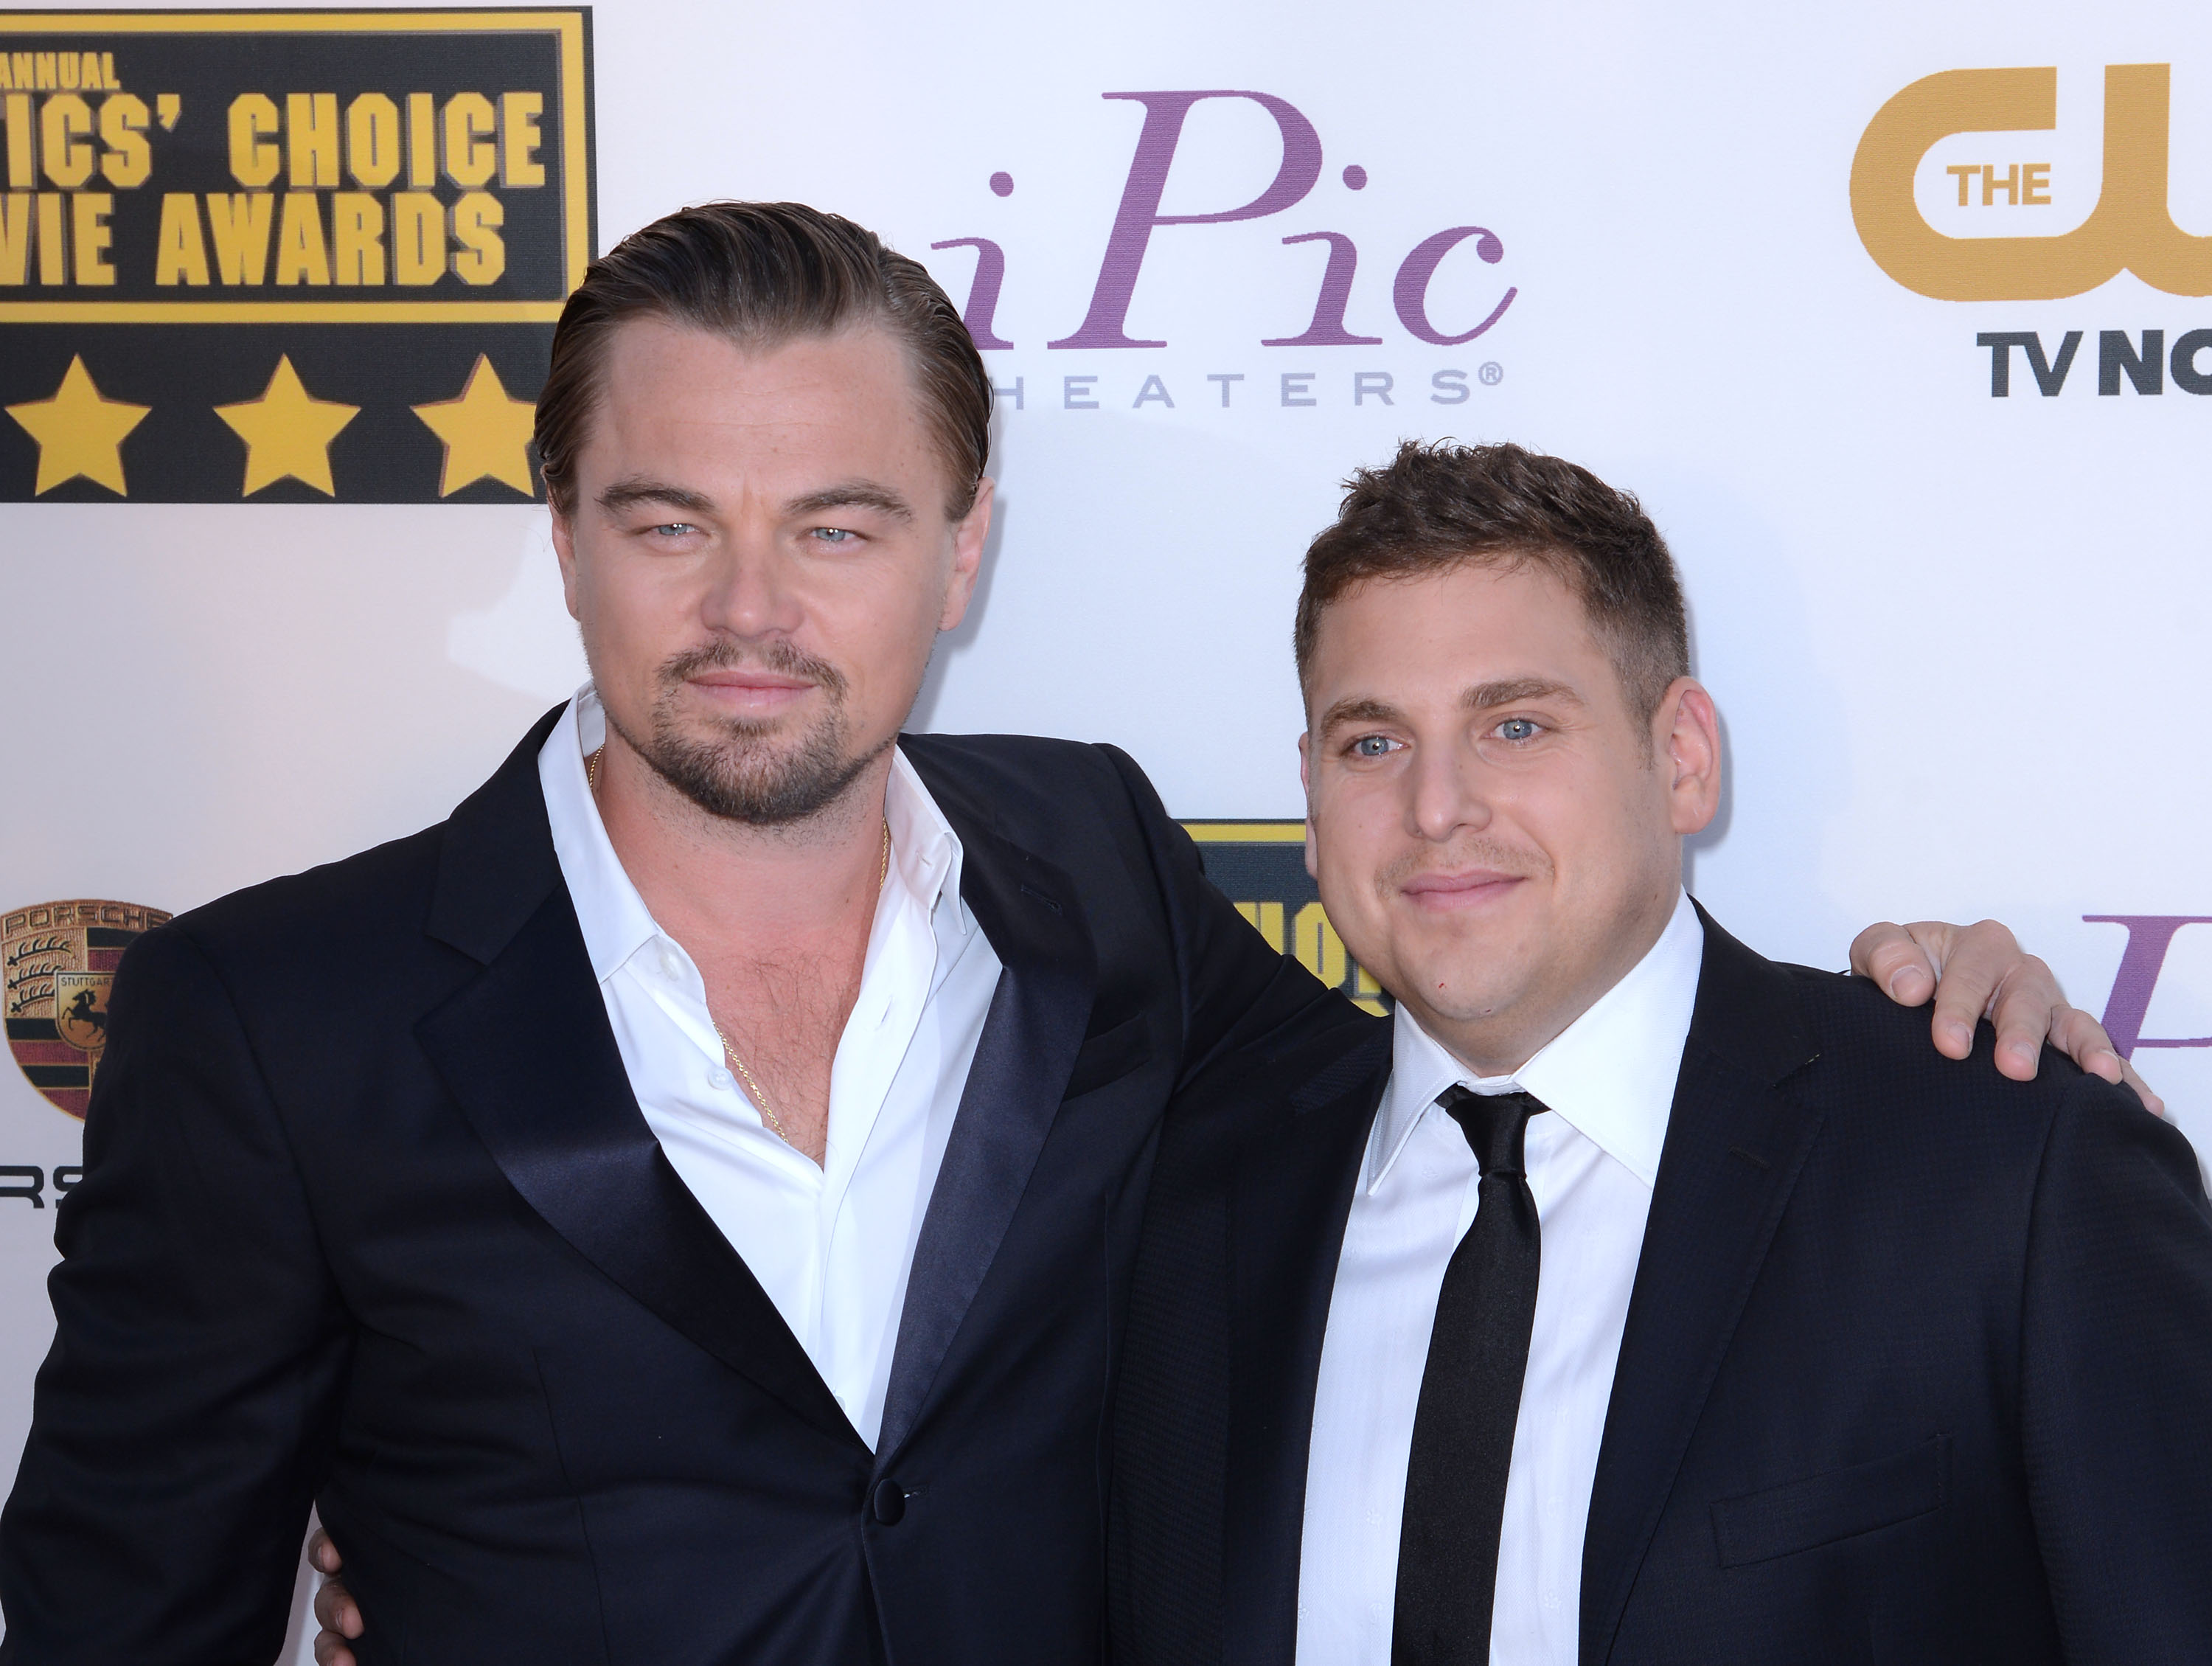 Leonardo DiCaprio and Jonah Hill arrive at the 19th Annual Critics' Choice Movie Awards at Barker Hangar on January 16, 2014 in Santa Monica, California. (C Flanigan / Getty Images)